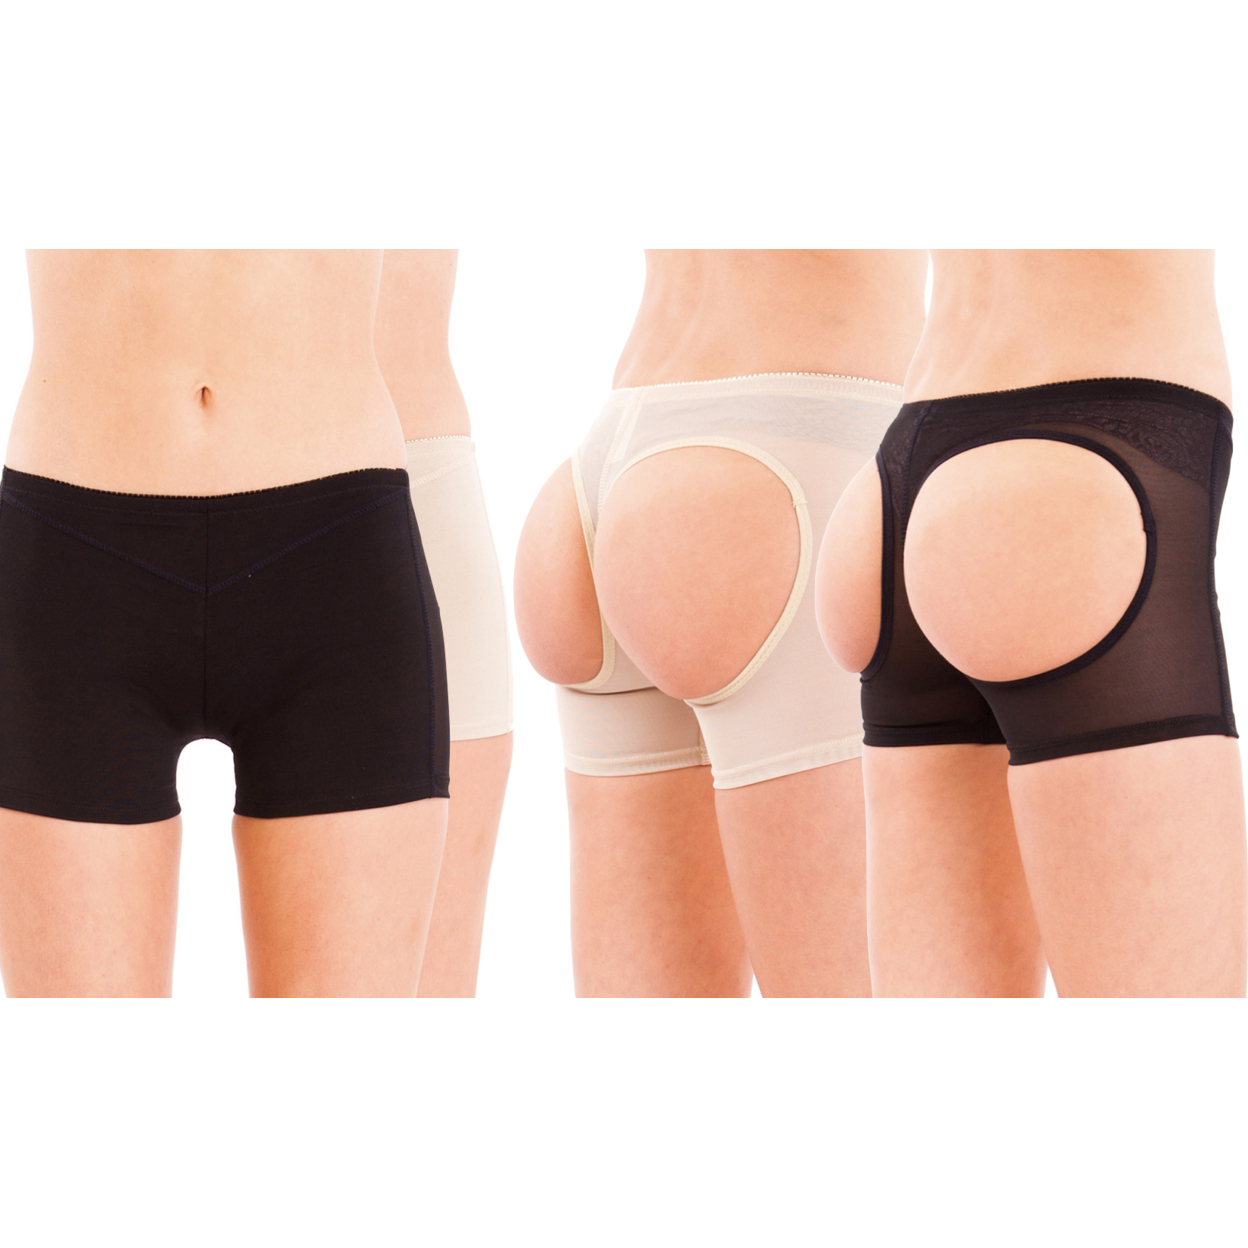 Women Tummy-Control Brief In Regular And Plus Sizes - Beige & Black, Large